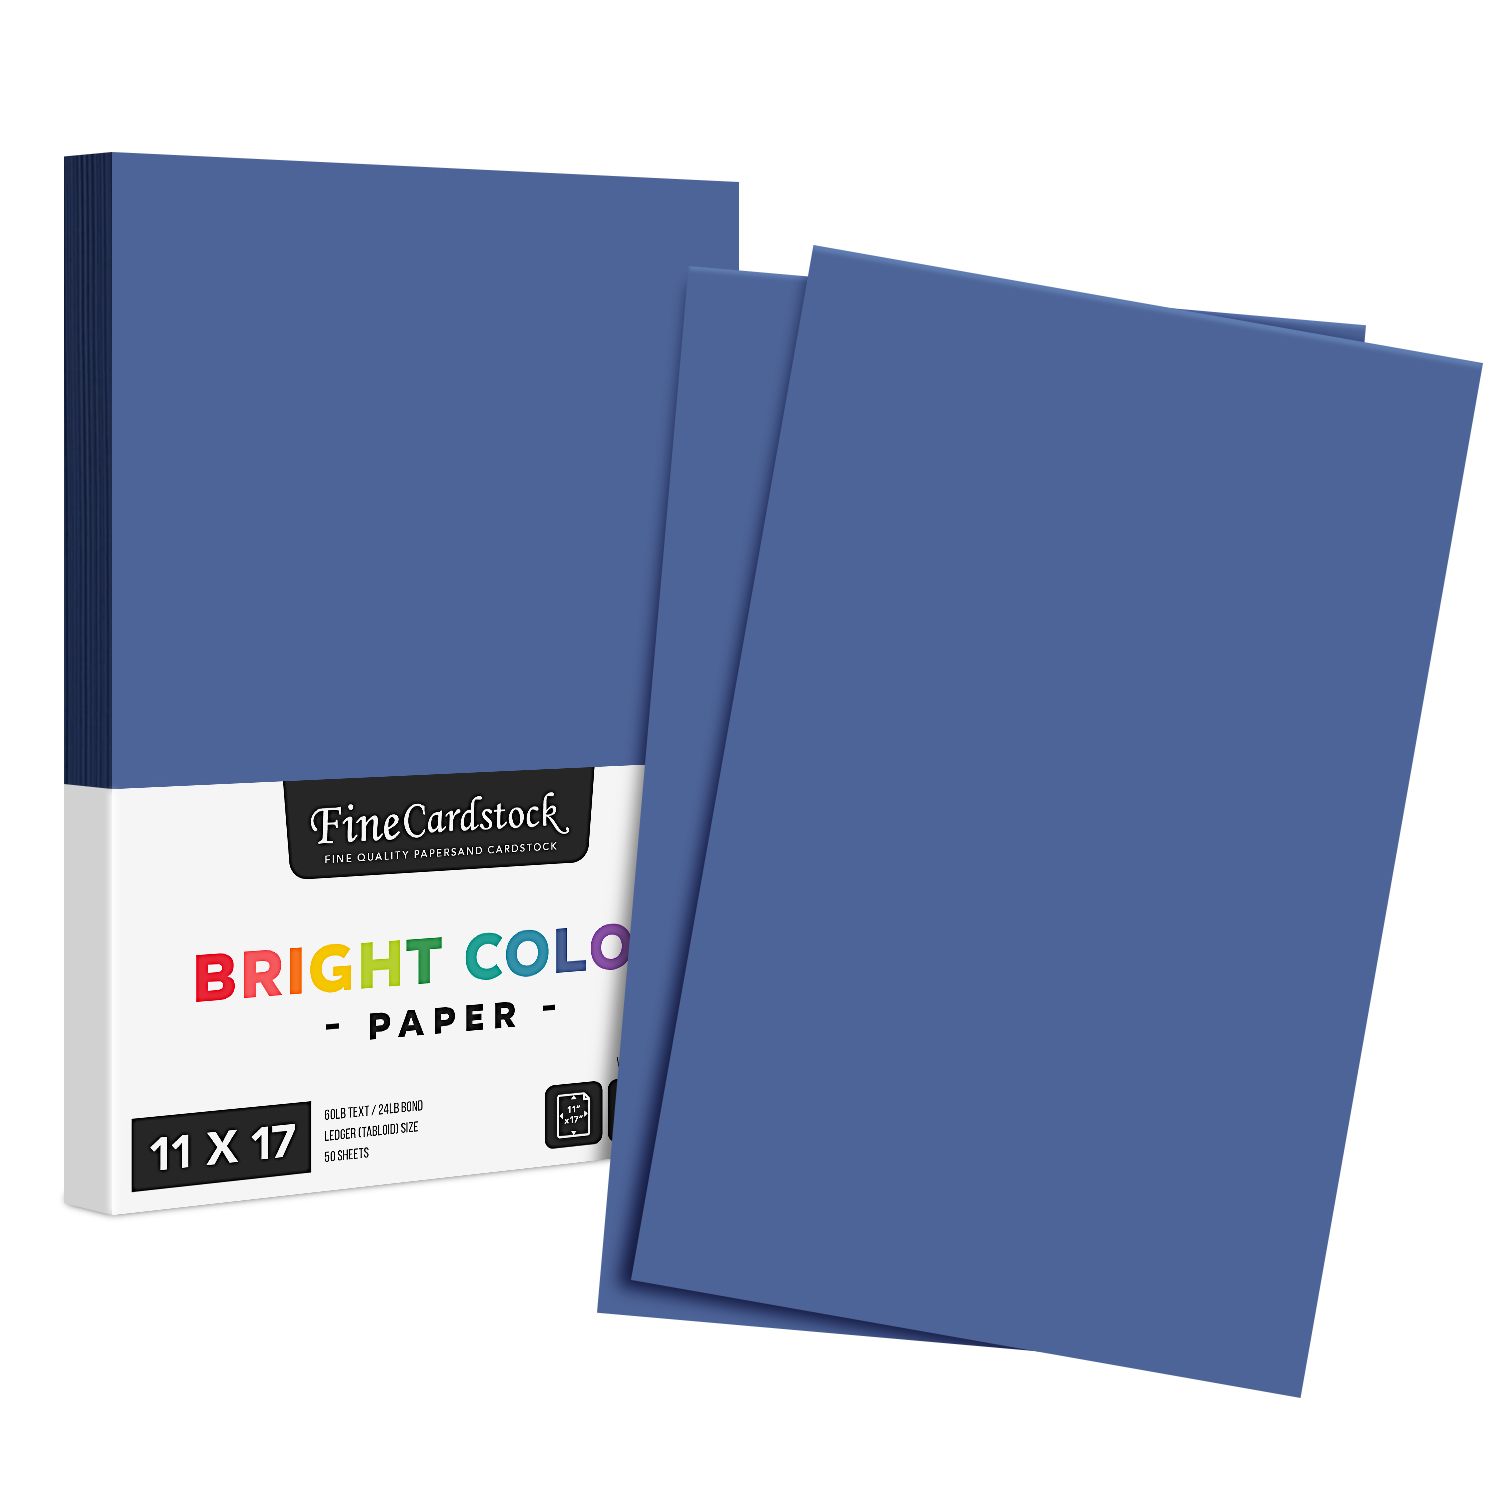 A3 White Cardstock - Bulk and Wholesale - Fine Cardstock